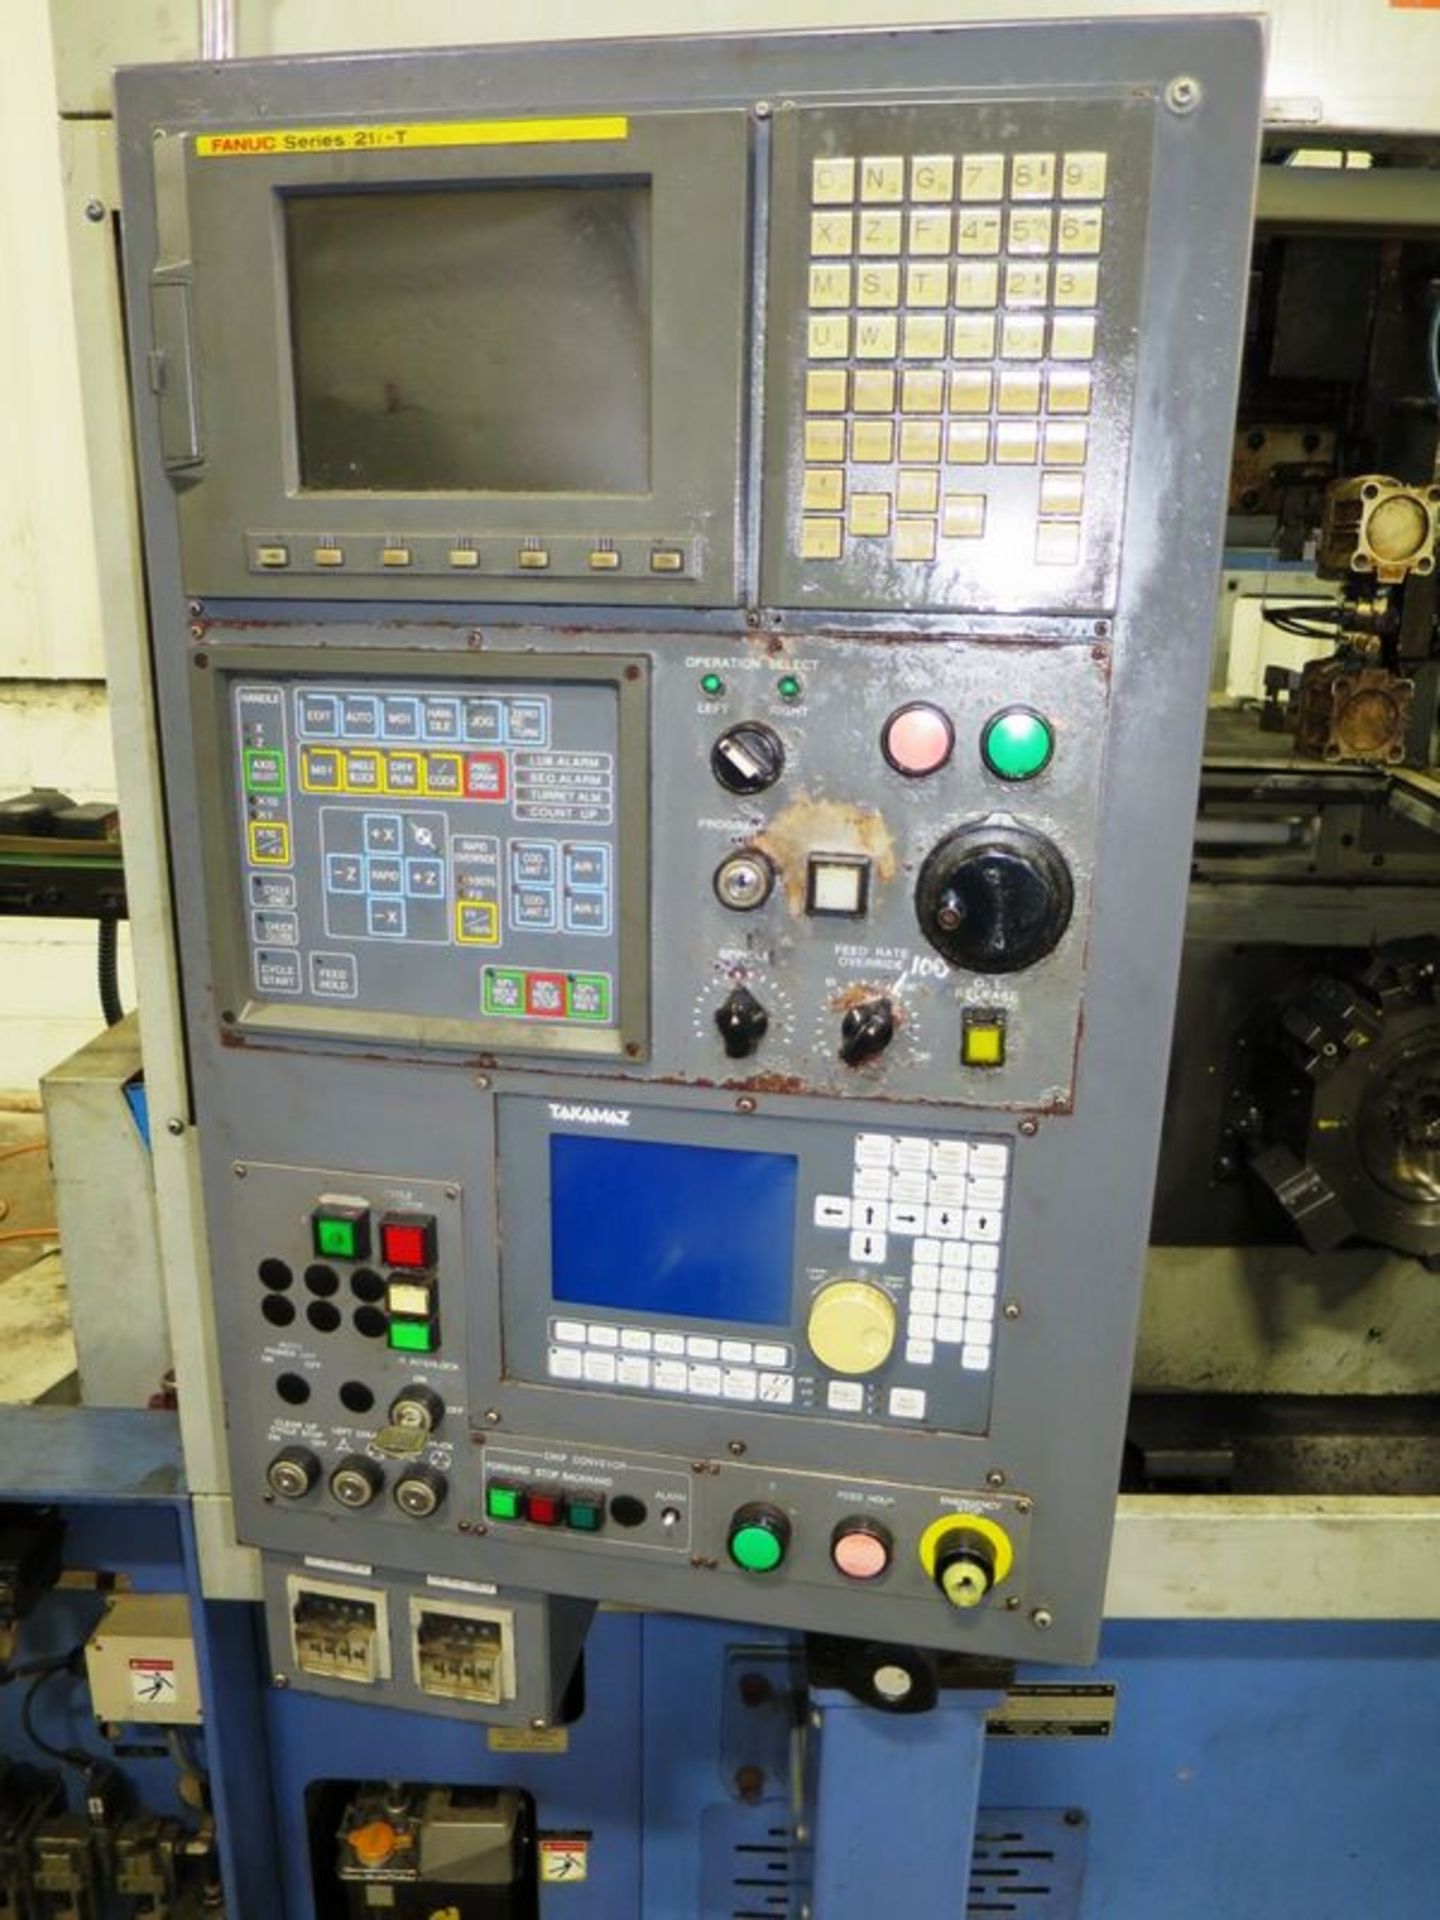 Takamaz XD-101 CNC Twin Spindle Turning Center with Gantry Loading System, S/N 300444, New 2006 - Image 2 of 13